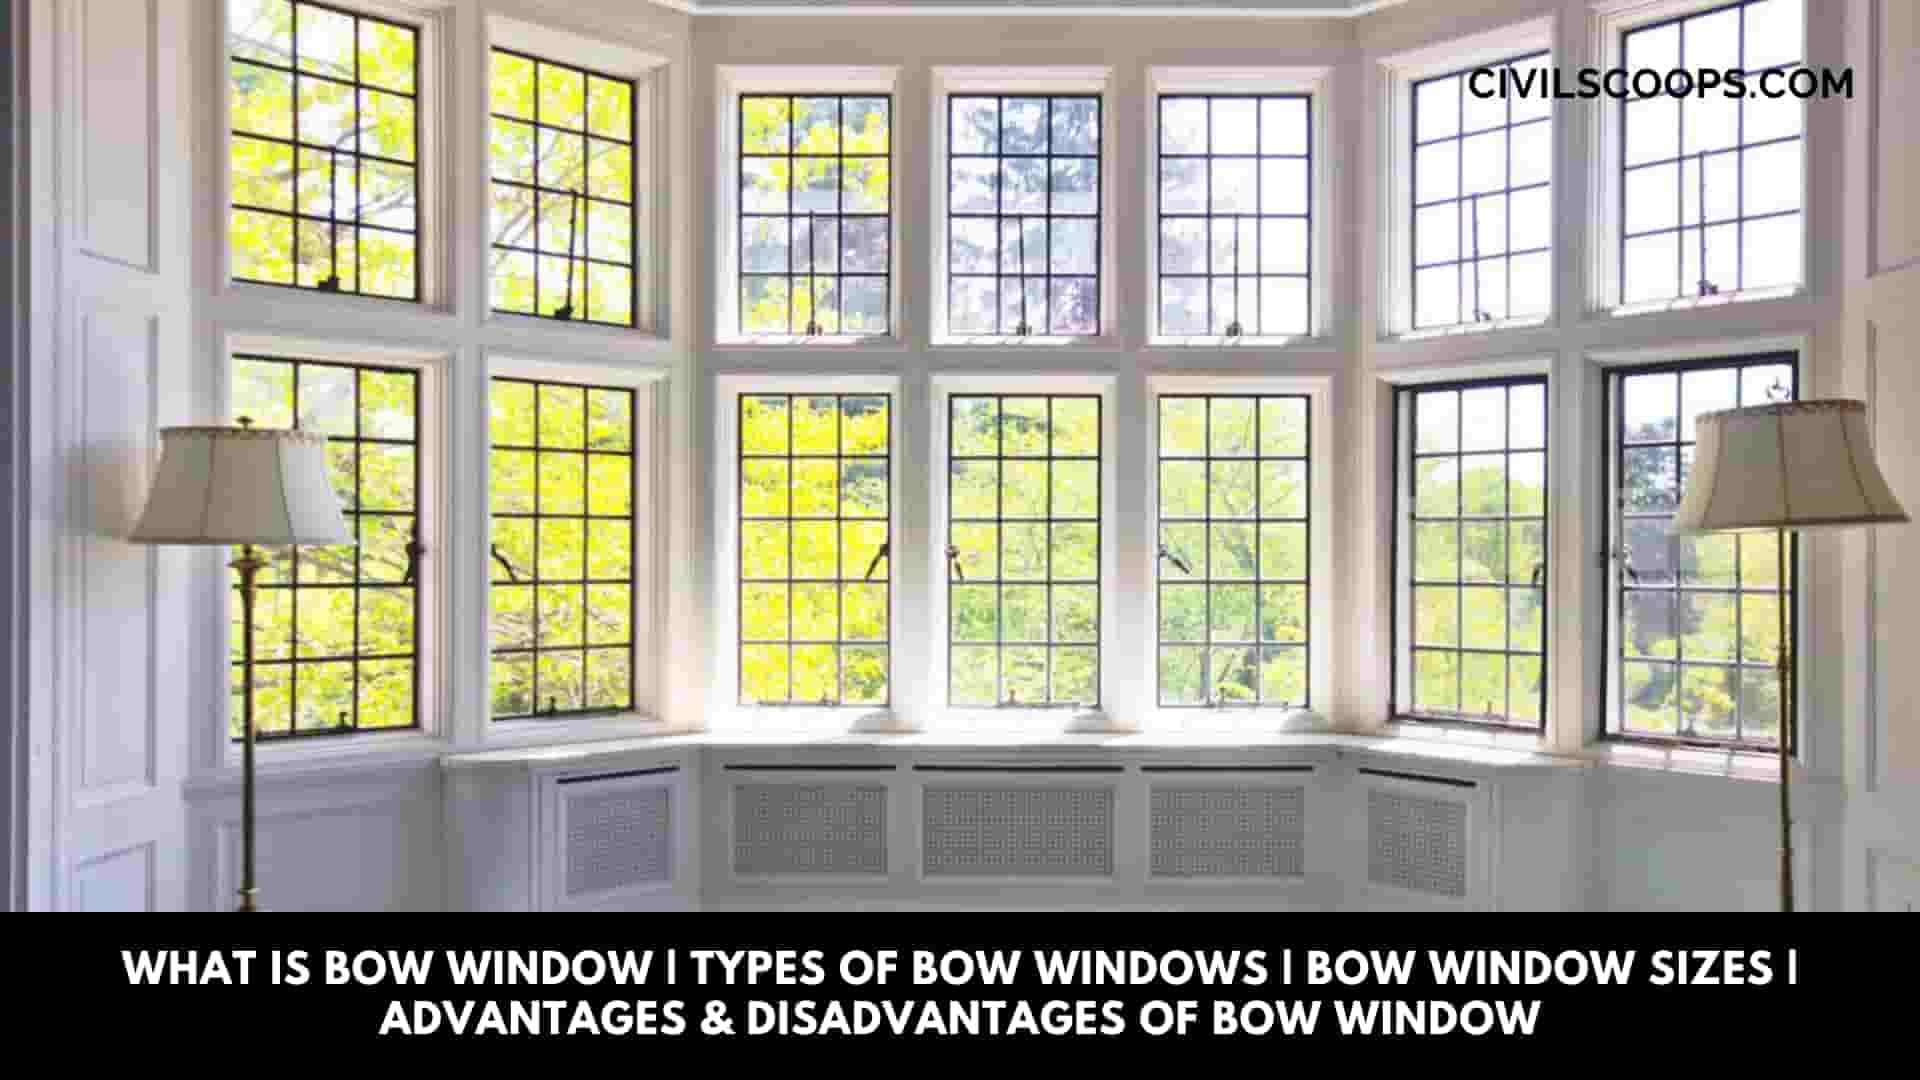 What Is Bow Window Types of Bow Windows Bow Window Sizes Advantages & Disadvantages of Bow Window 